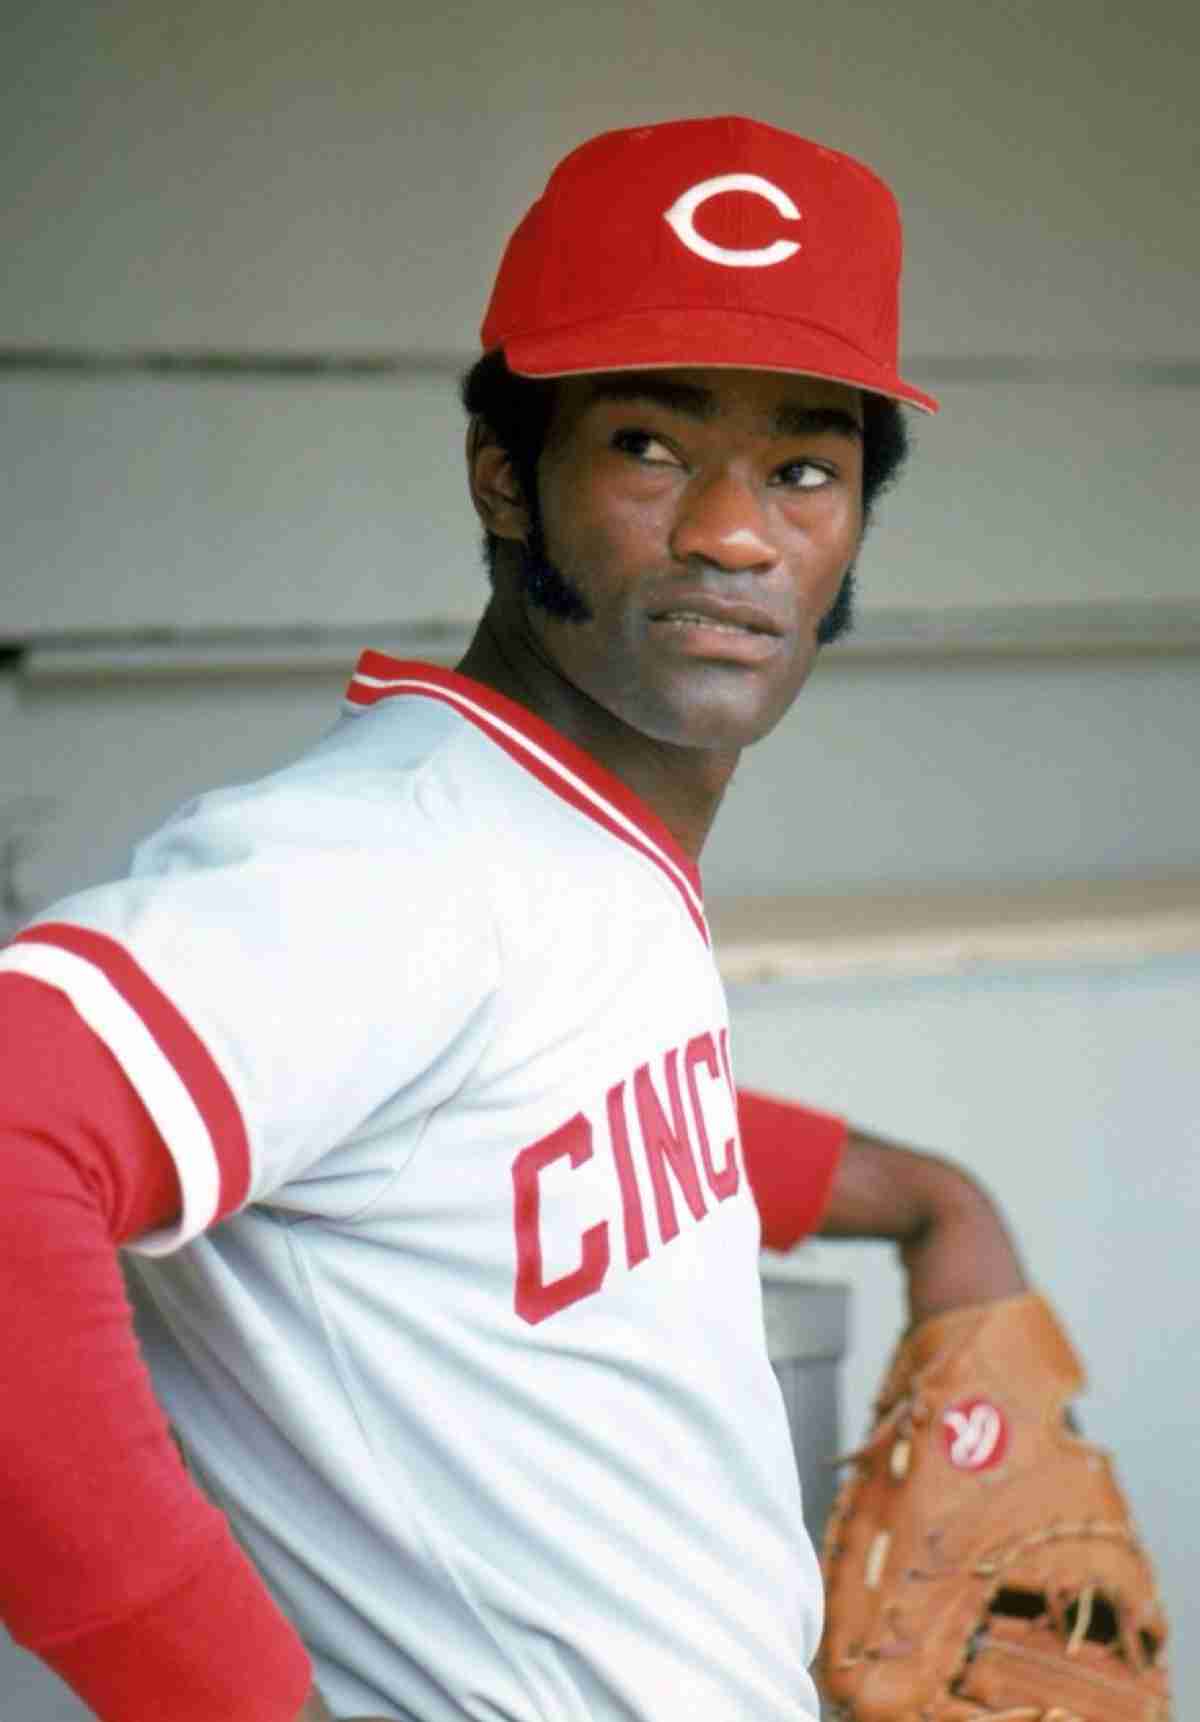 Not in Hall of Fame - 10. George Foster